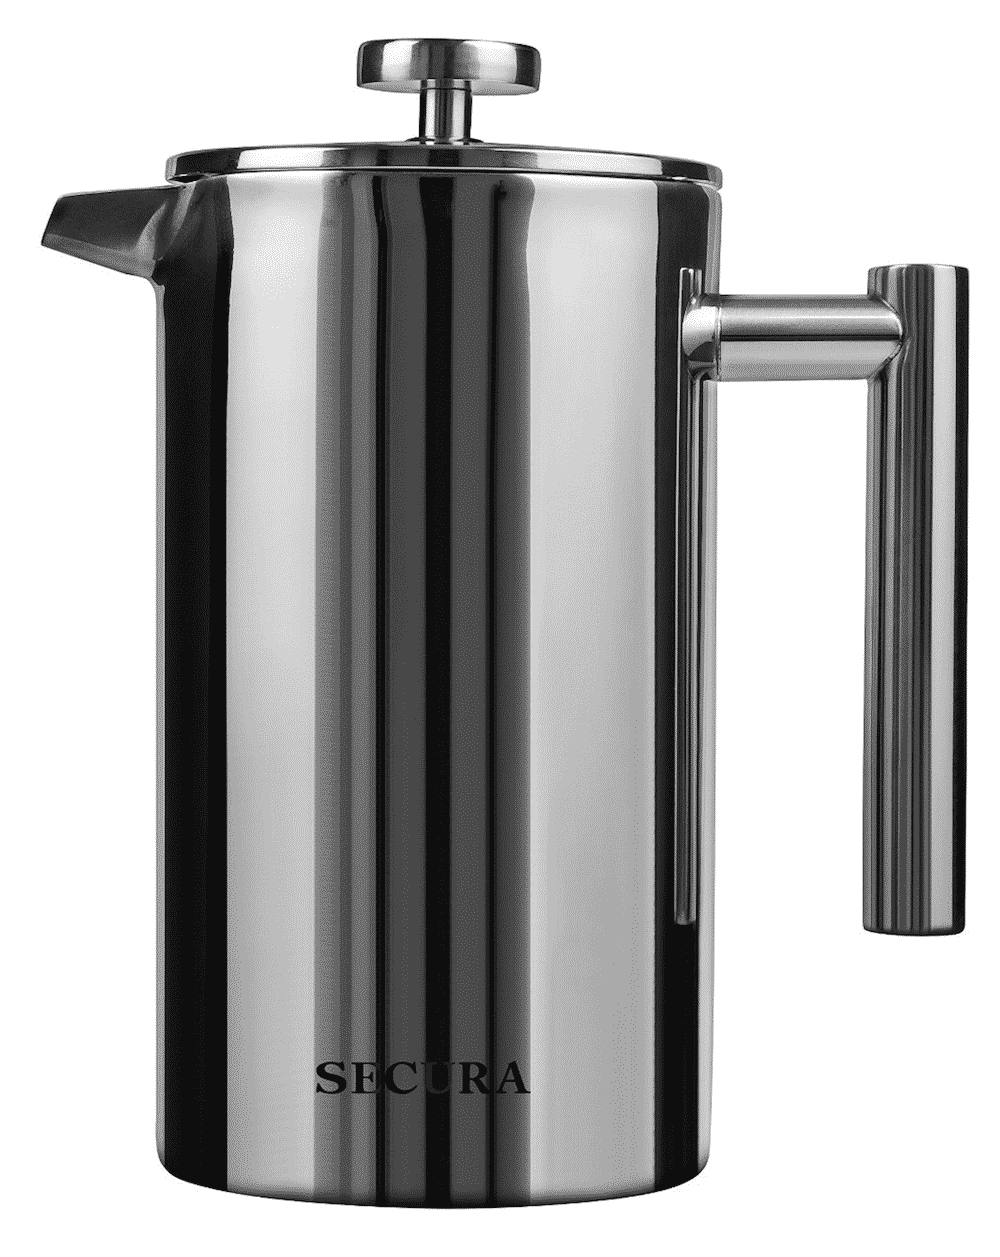 Stainless steel French press